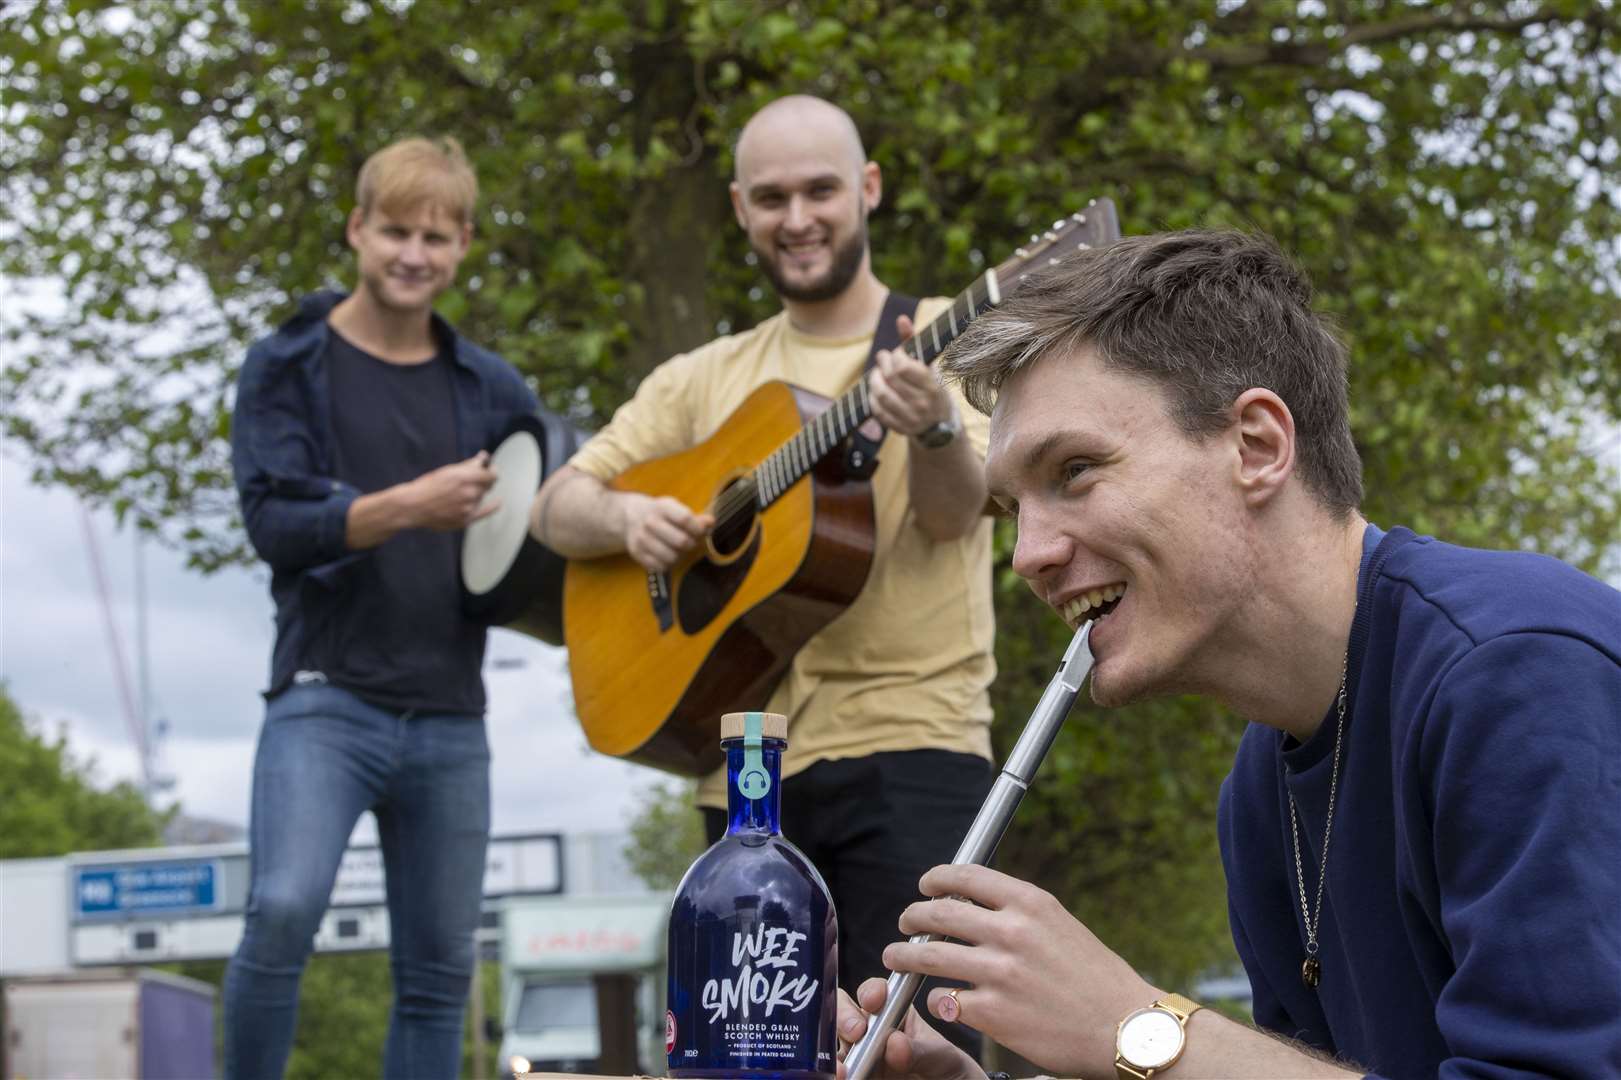 Ali Levack and his band play some tunes to encourage Wee Smoky to improve its flavour.